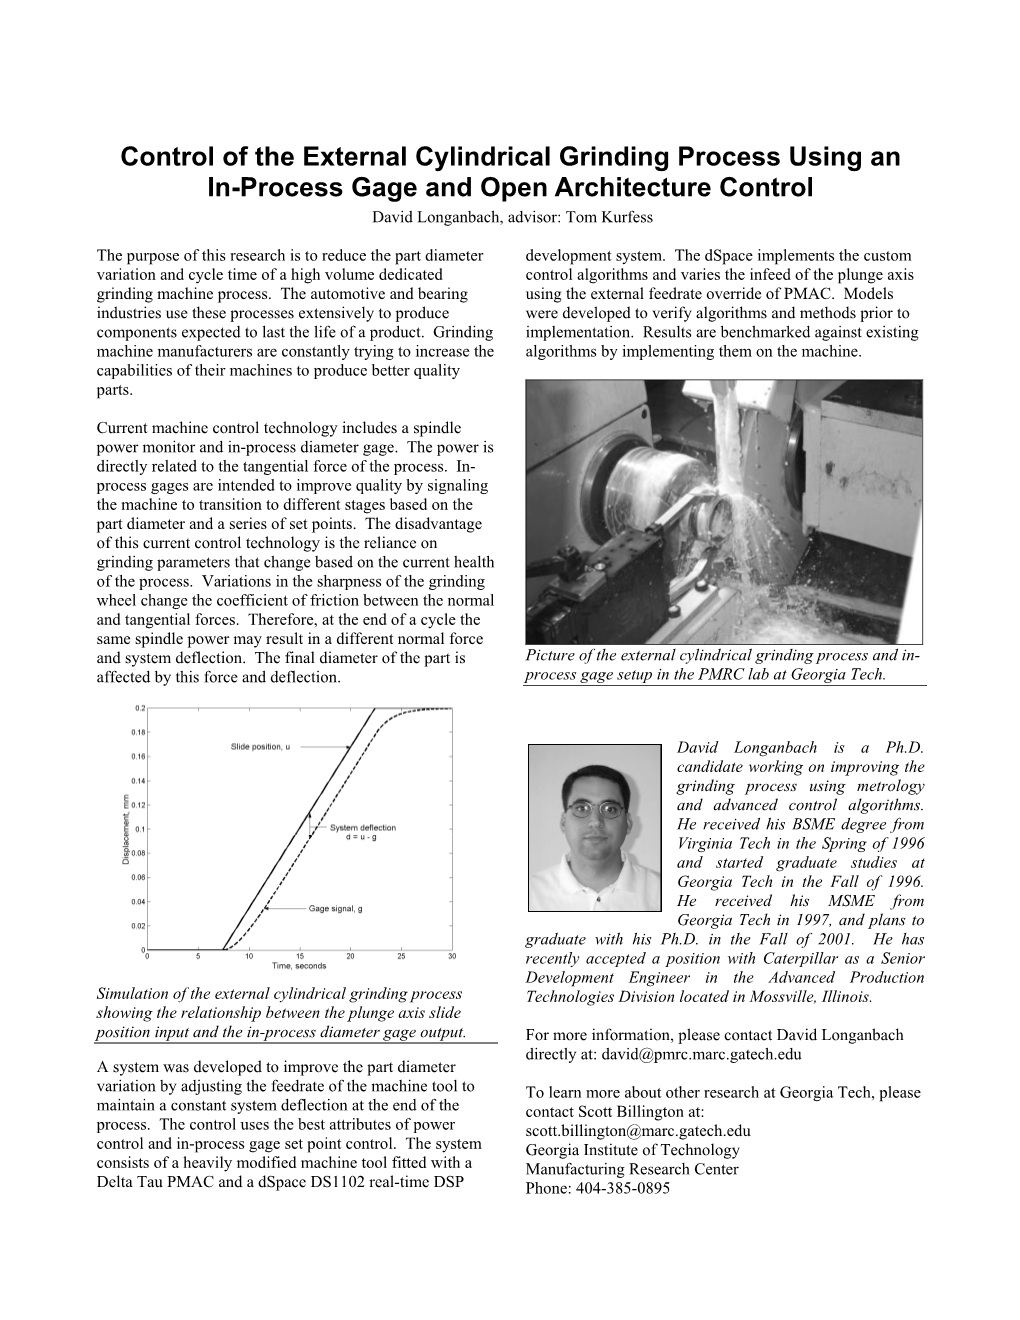 Control of the External Cylindrical Grinding Process Using an In-Process Gage and Open Architecture Control David Longanbach, Advisor: Tom Kurfess